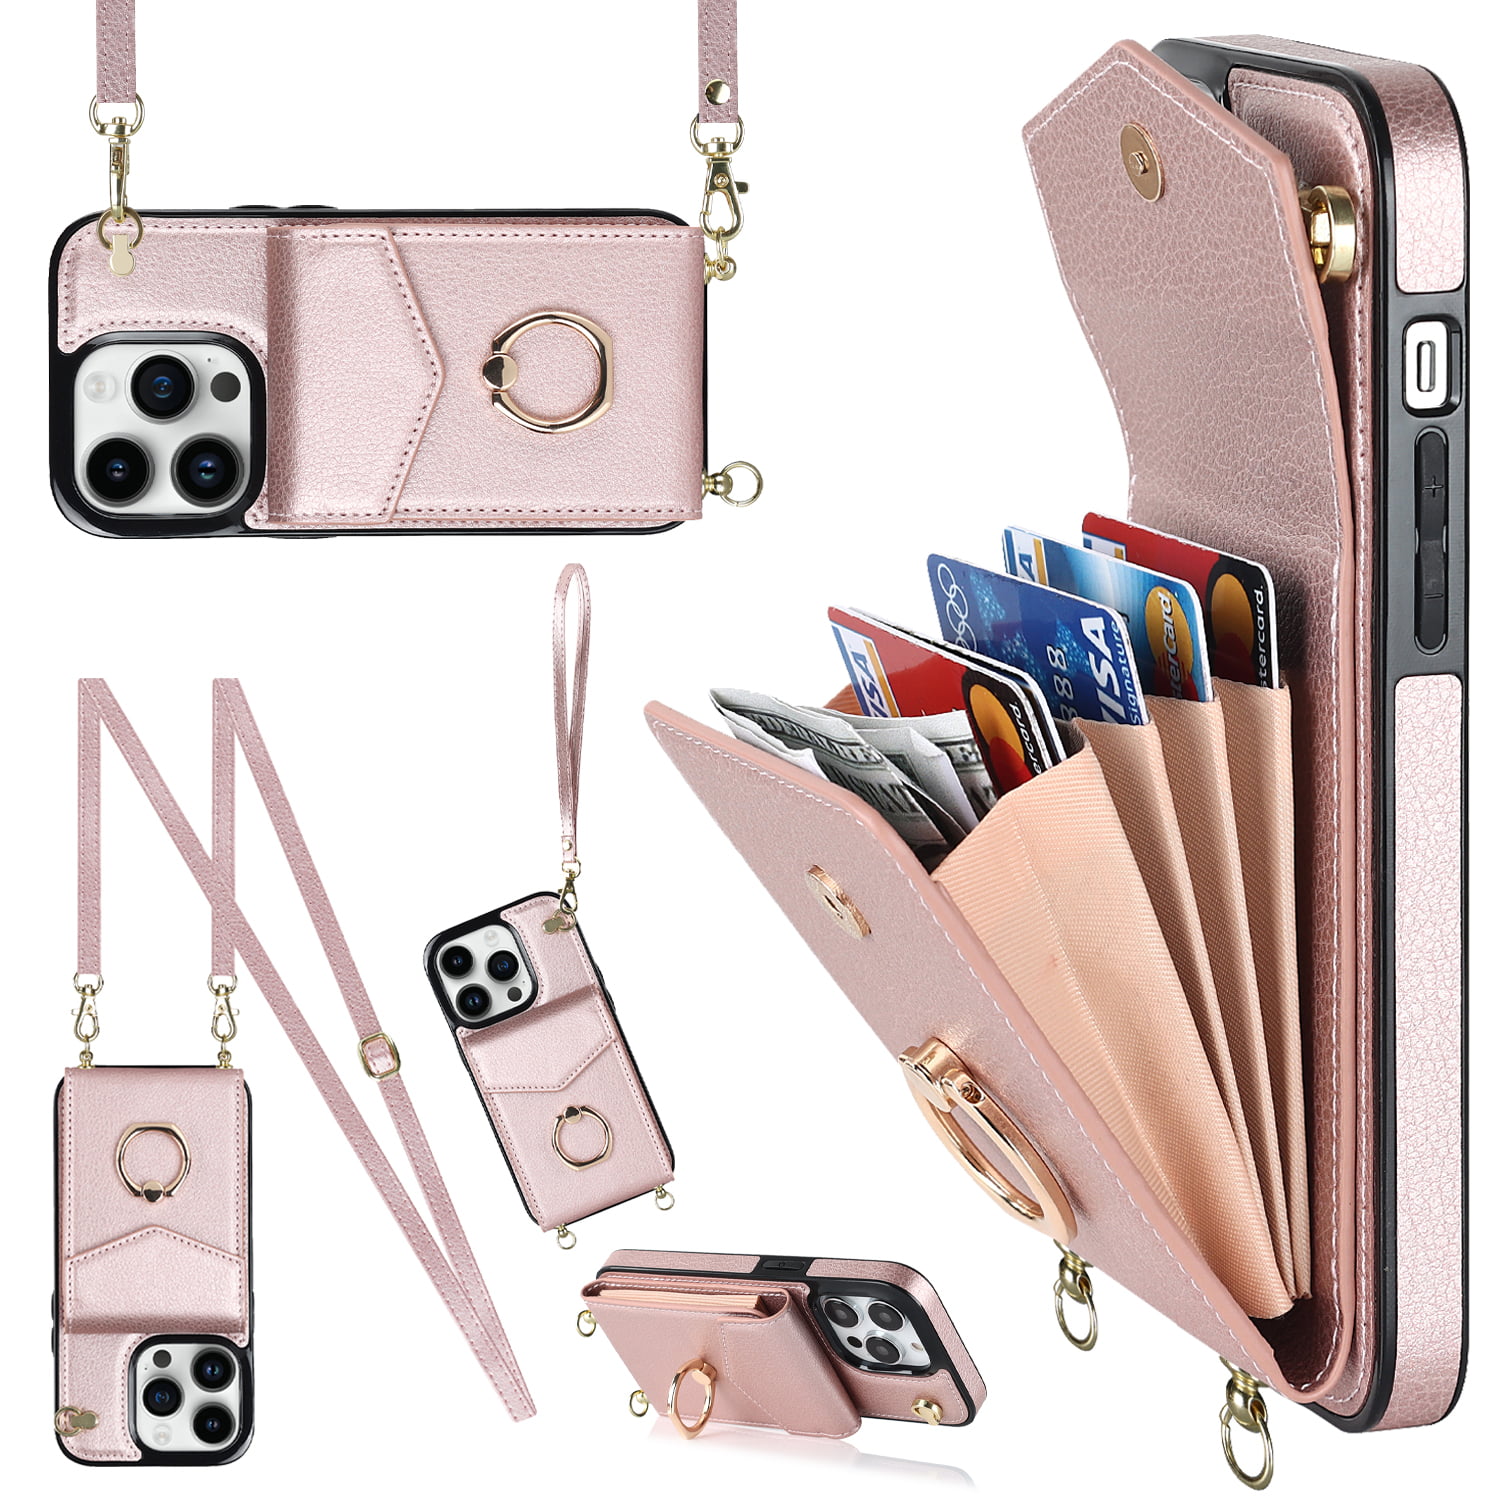 Nalacover Wallet Case for iPhone 12 Pro Max, PU Leather Shoulder Strap  Lanyard Crossbody Back Card Slot Bag Magnetic Cover with RFID Blocking Ring